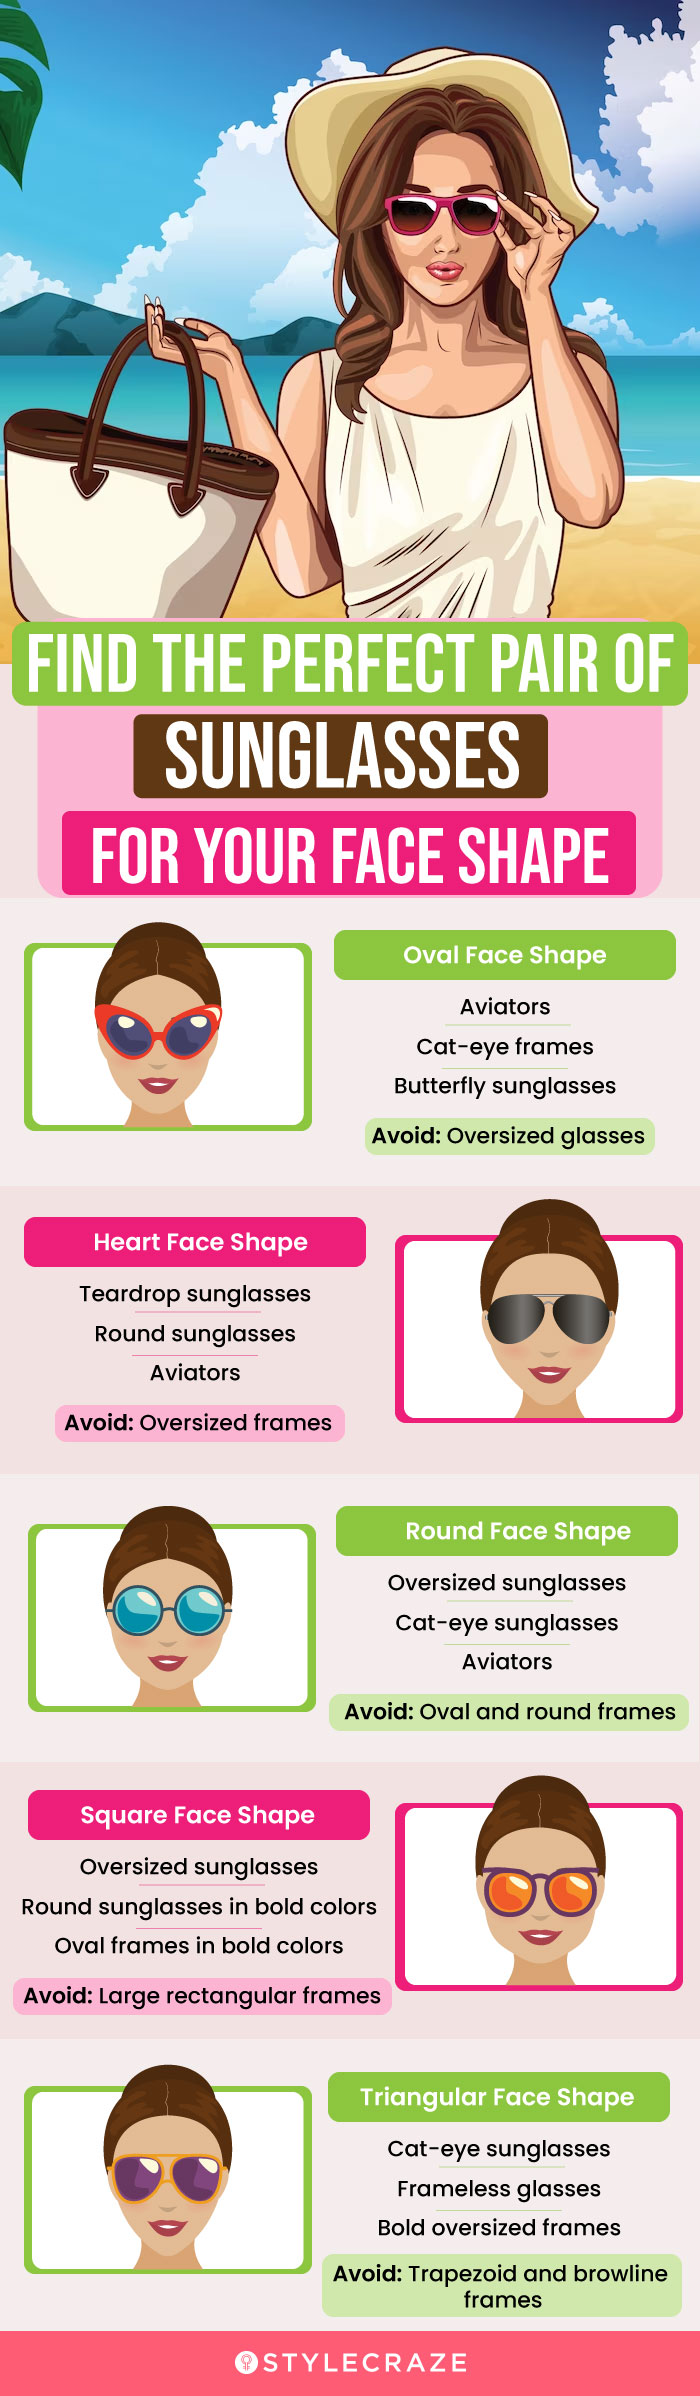 find the perfect pair of sunglasses for your face shape (infographic)